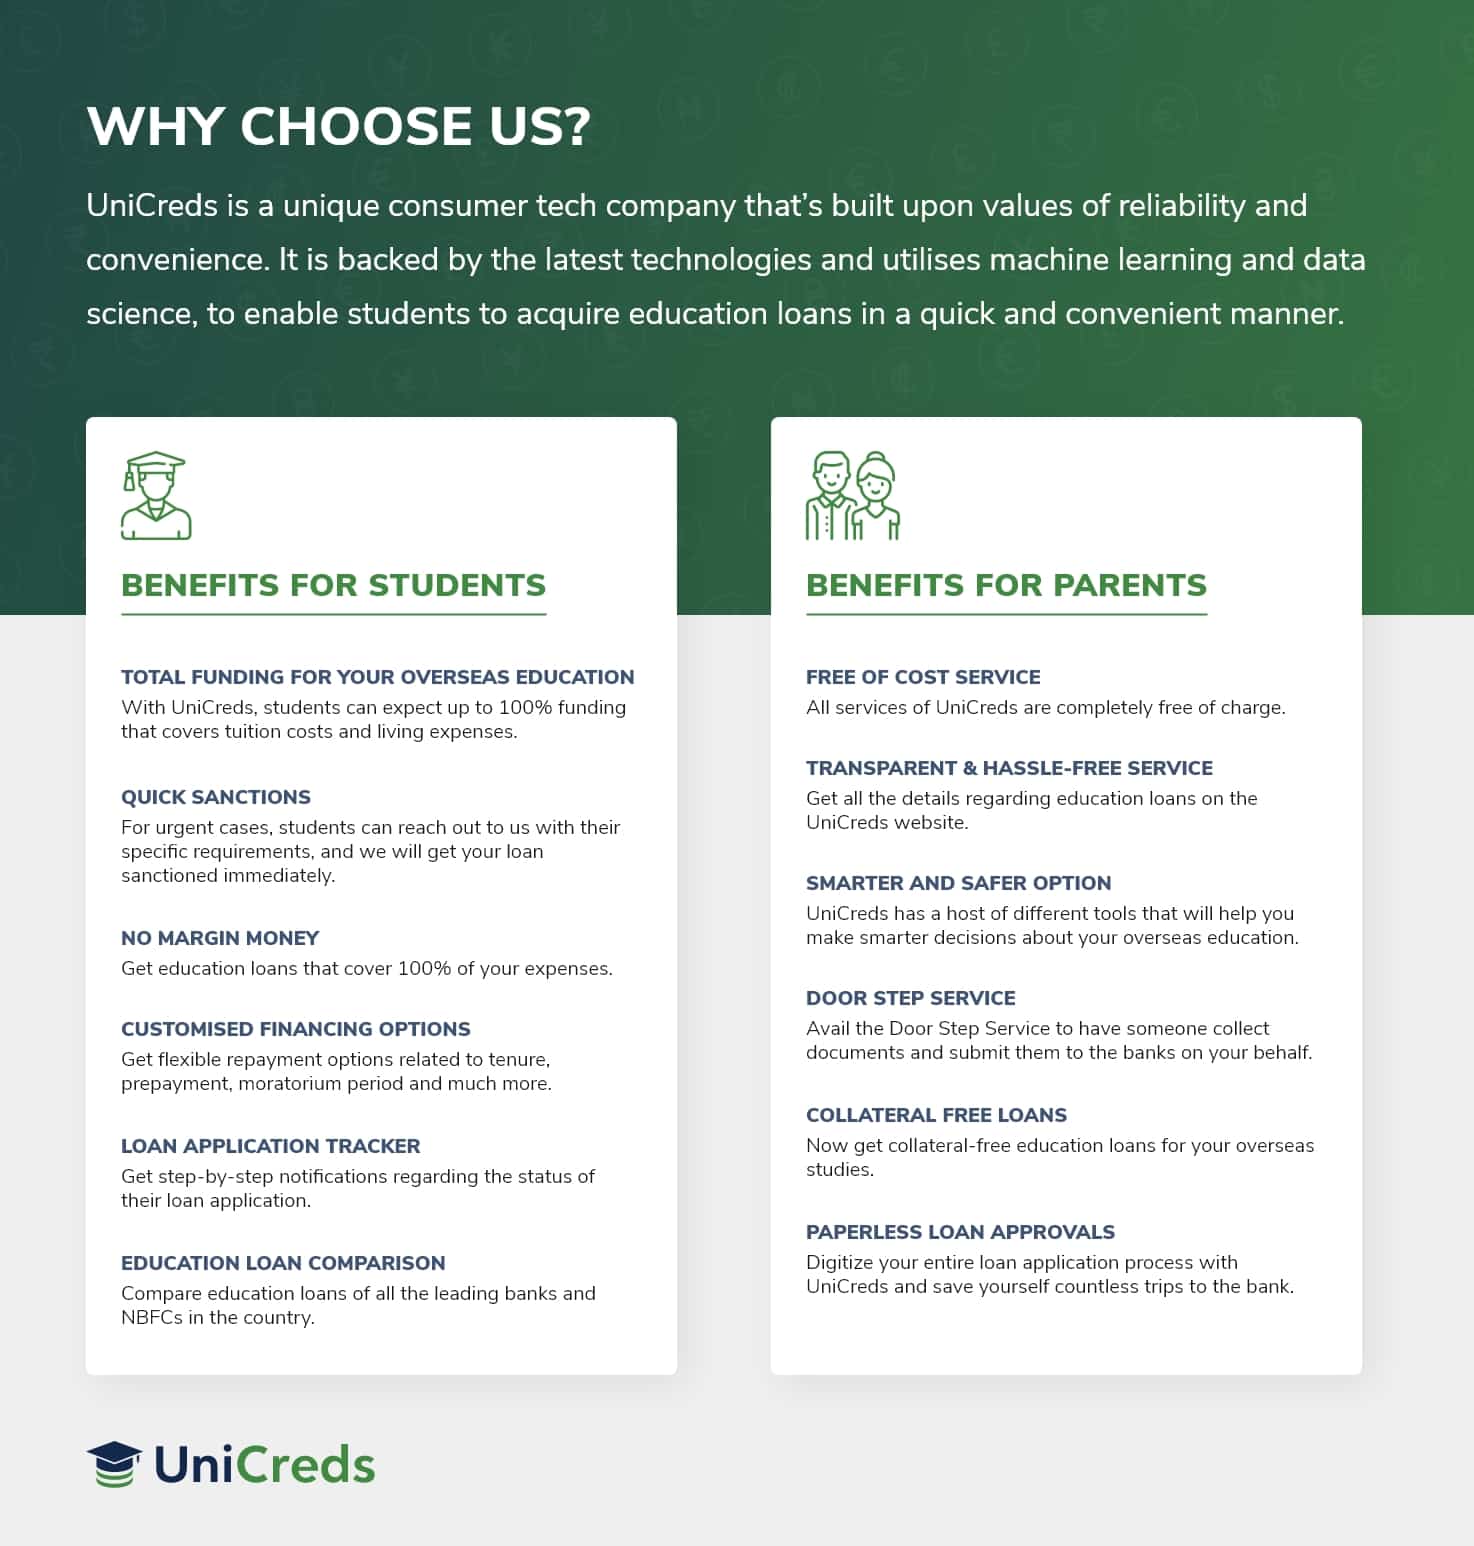 Why Choose UniCreds